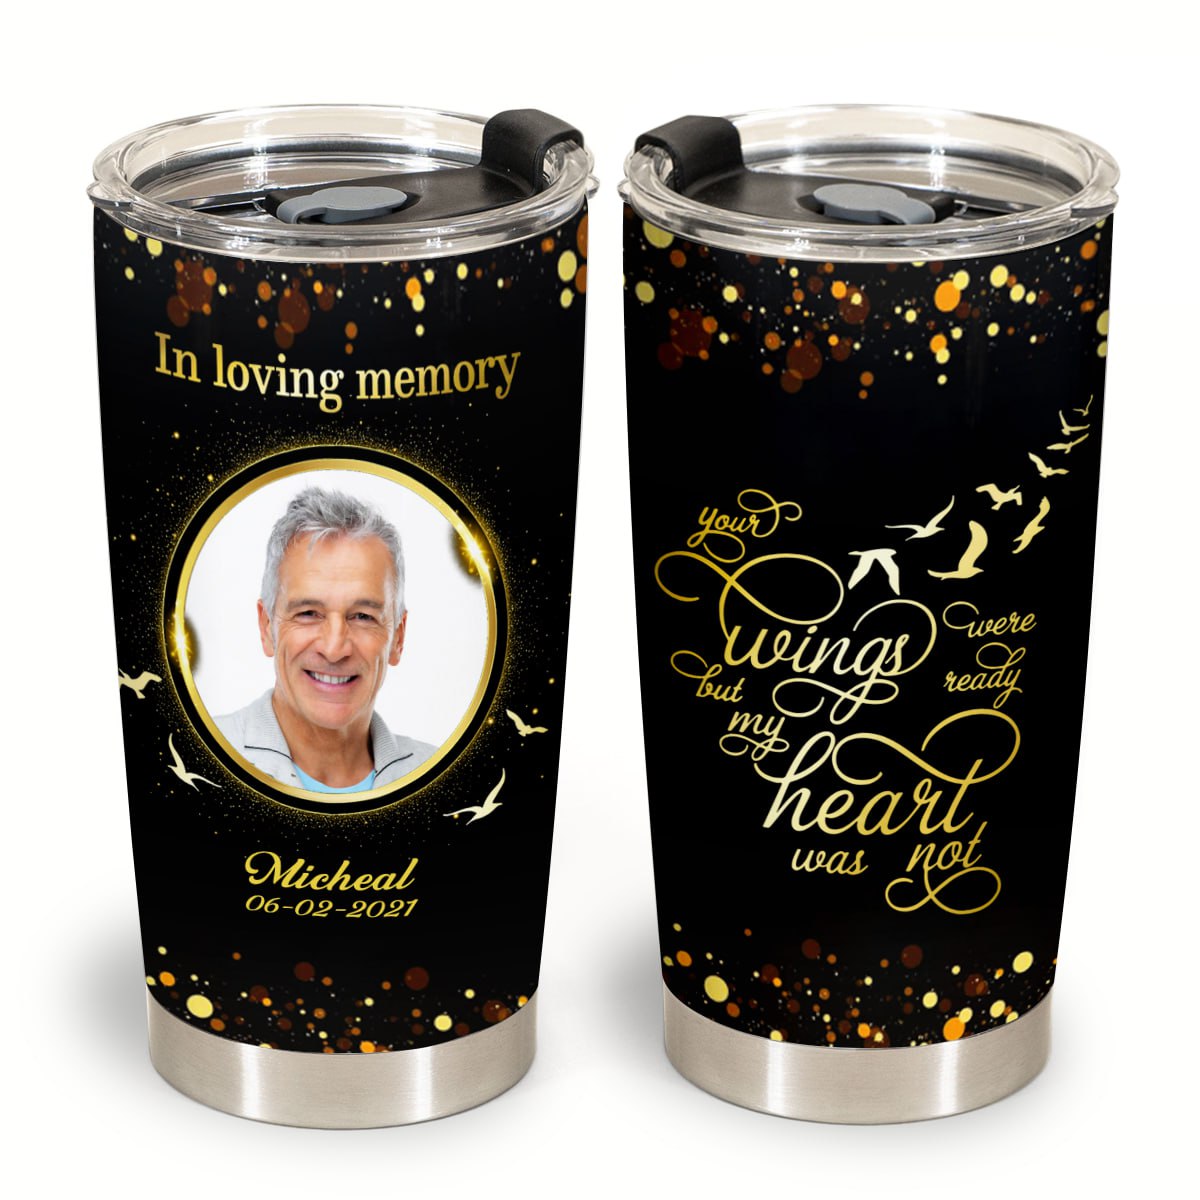 My Heart Was Not Ready Personalized Photo Tumbler Memorial